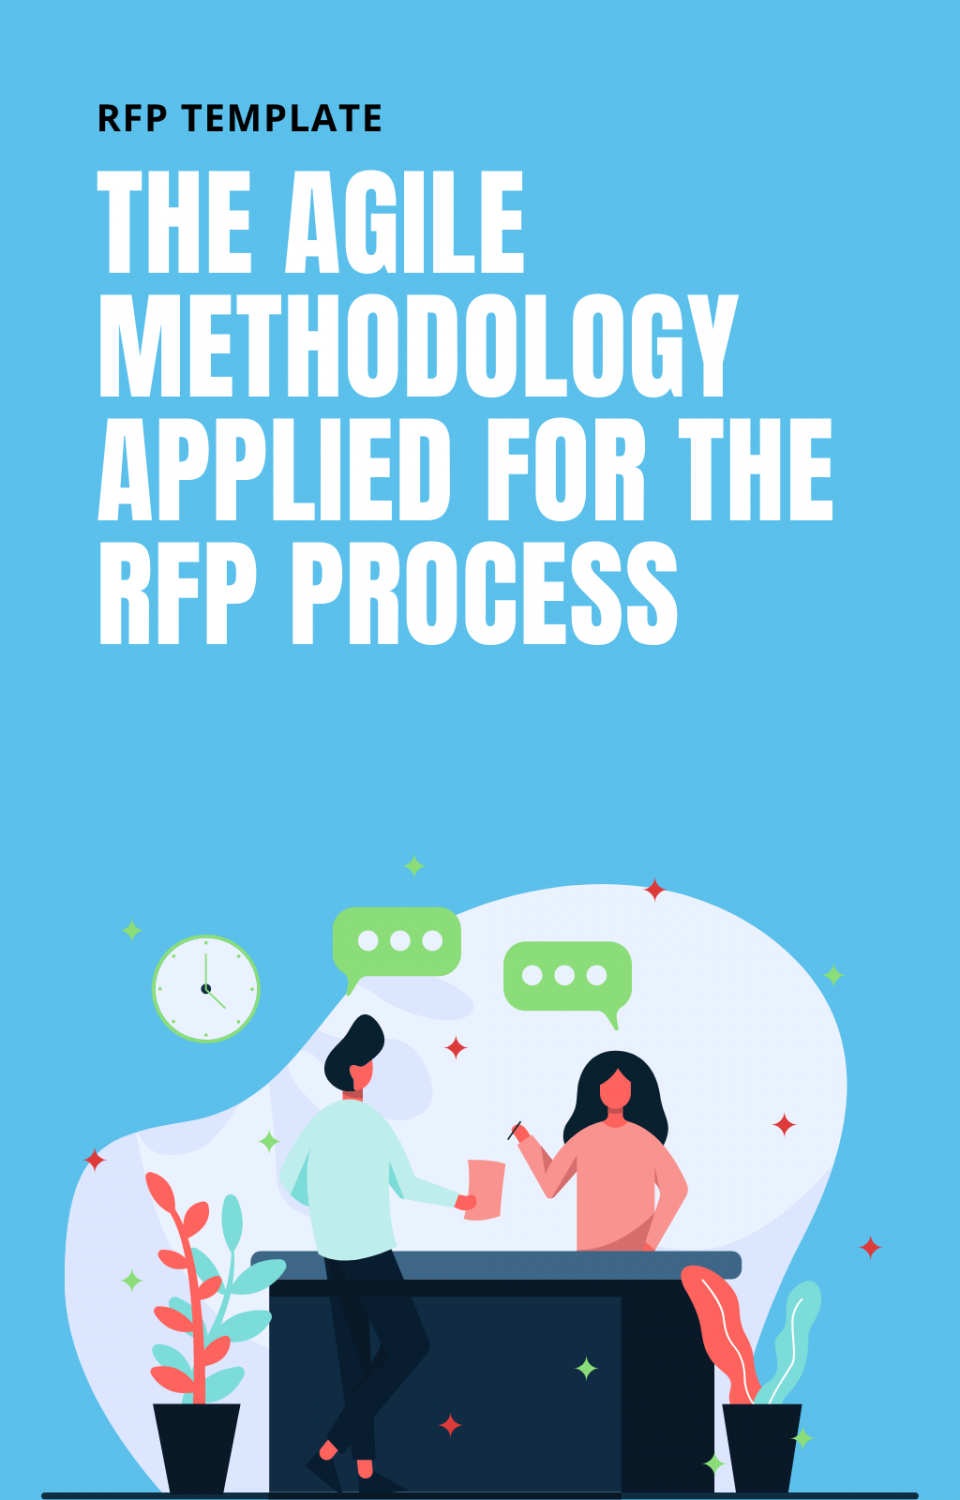 RFP template Agile methodology applied for the RFP process